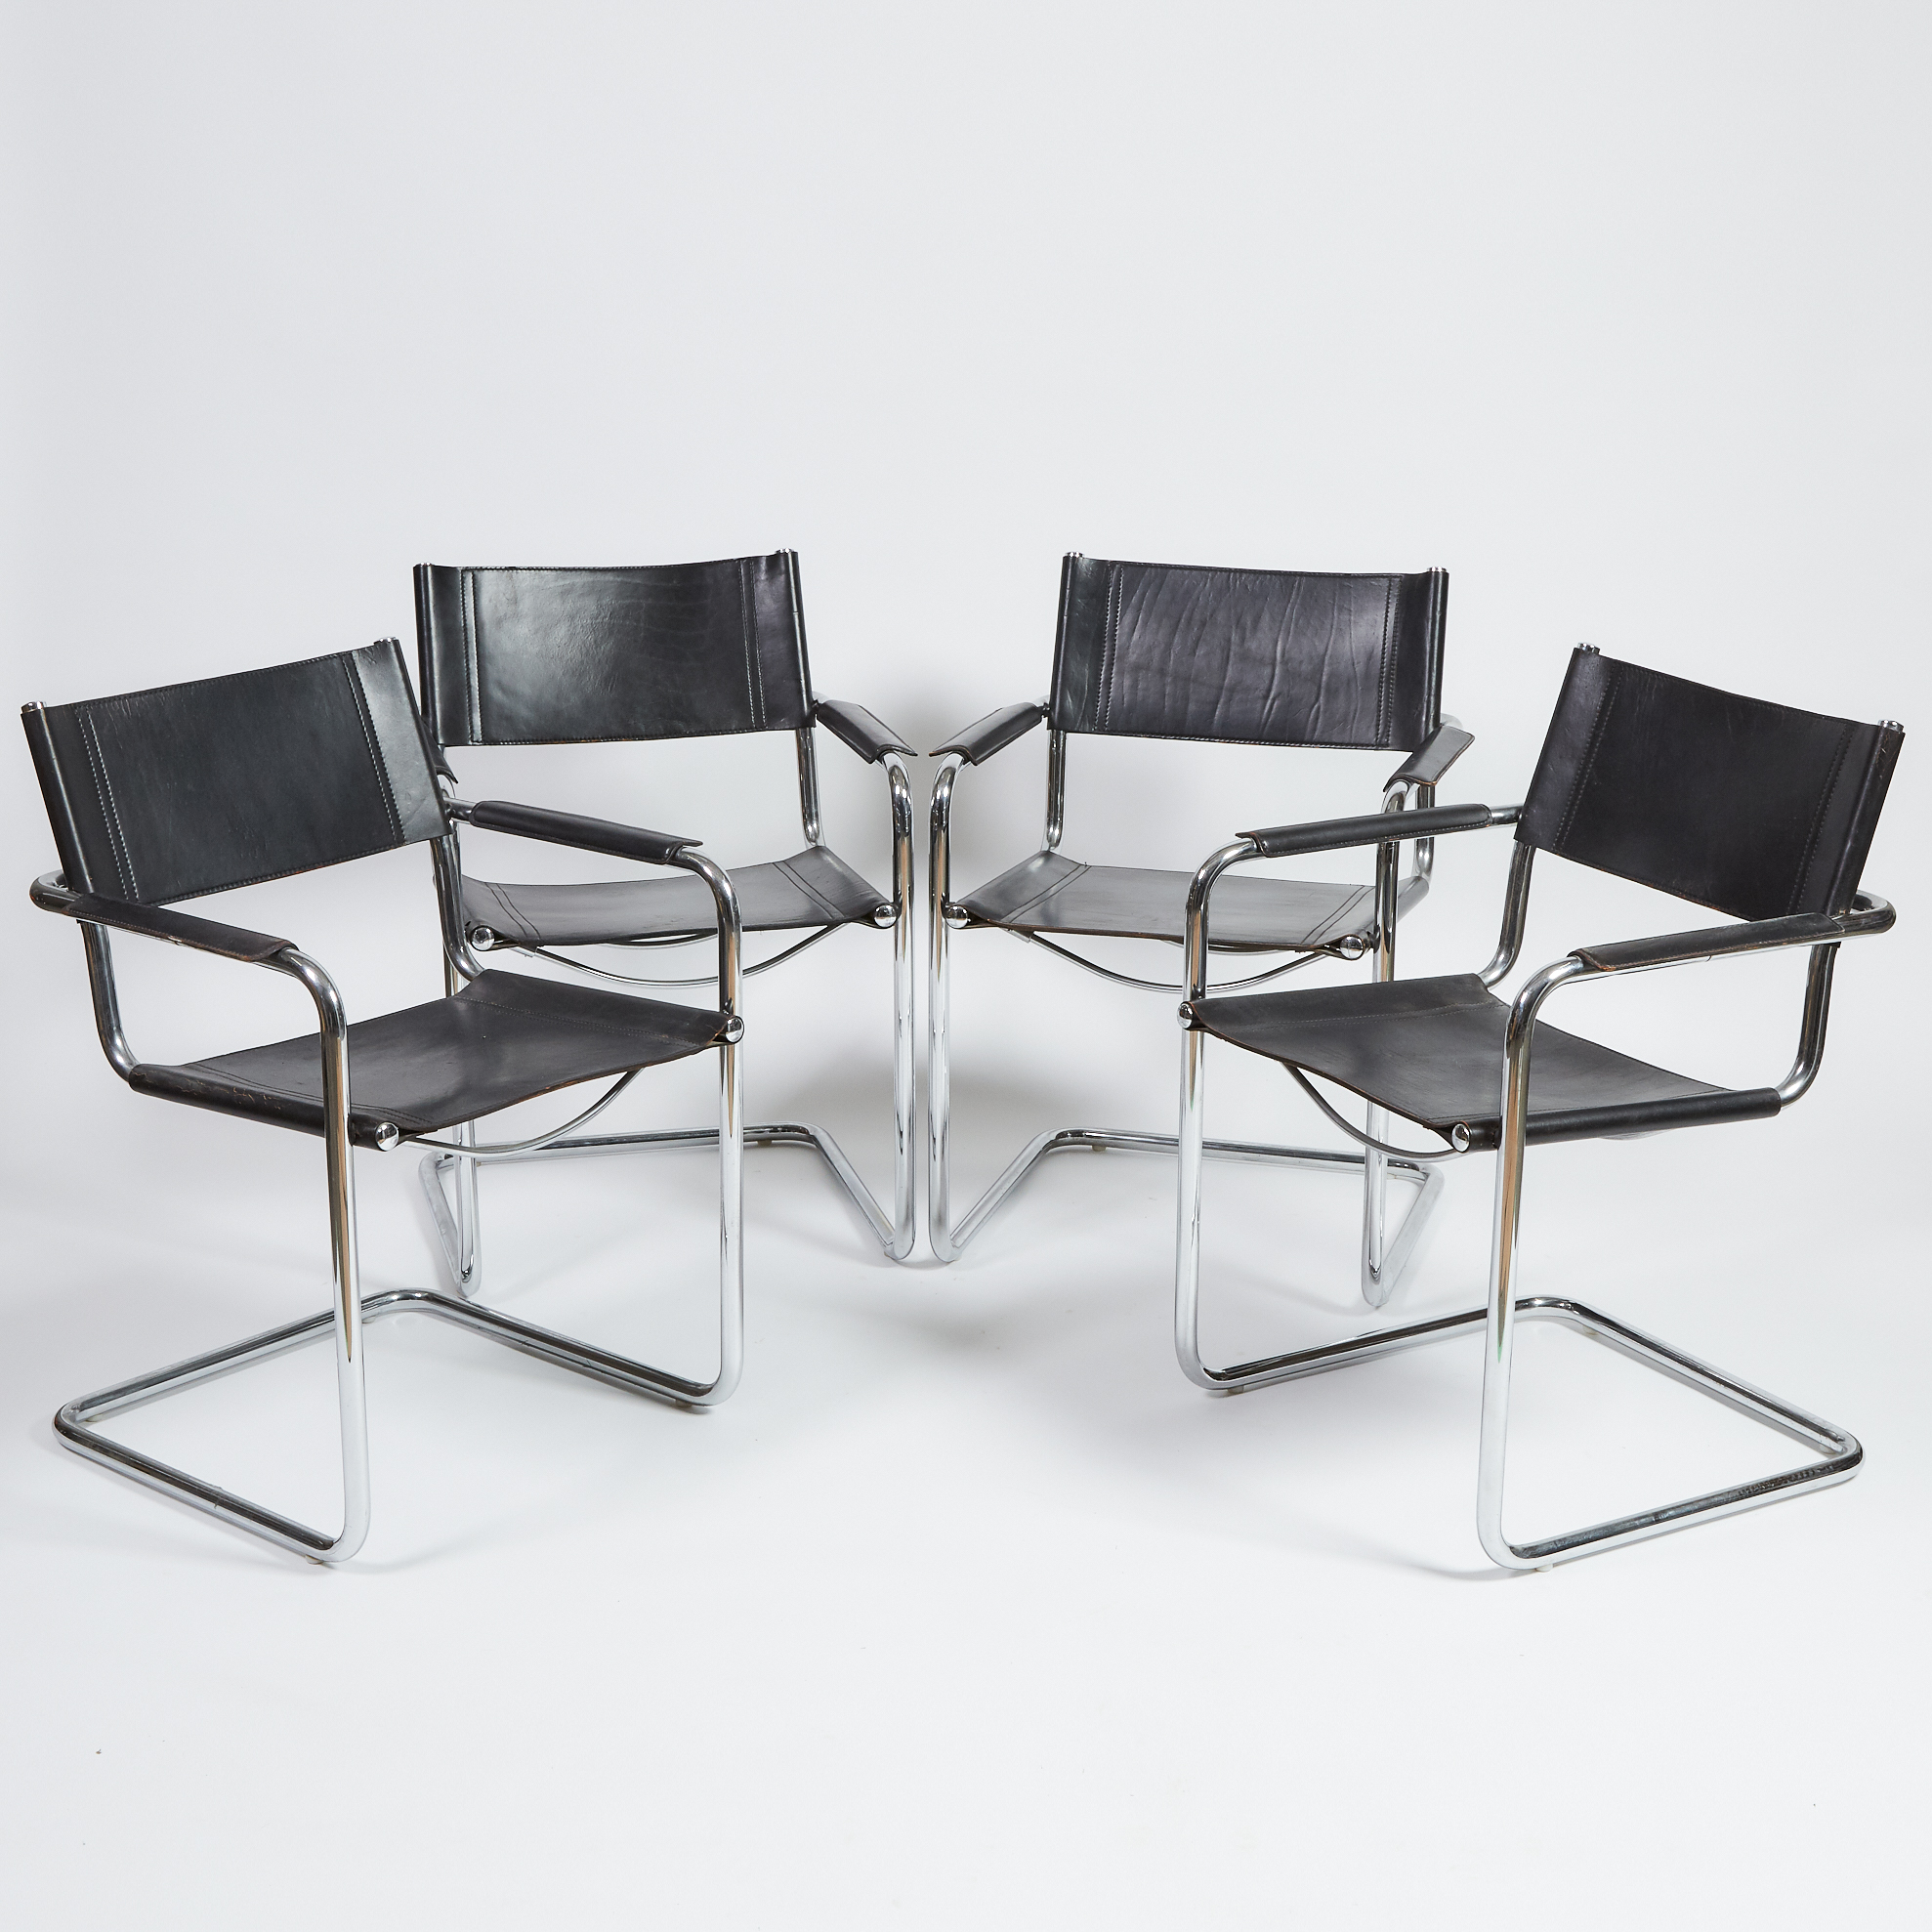 Set of Four Contemporary Chrome and Leather Arm Chairs, c.1984